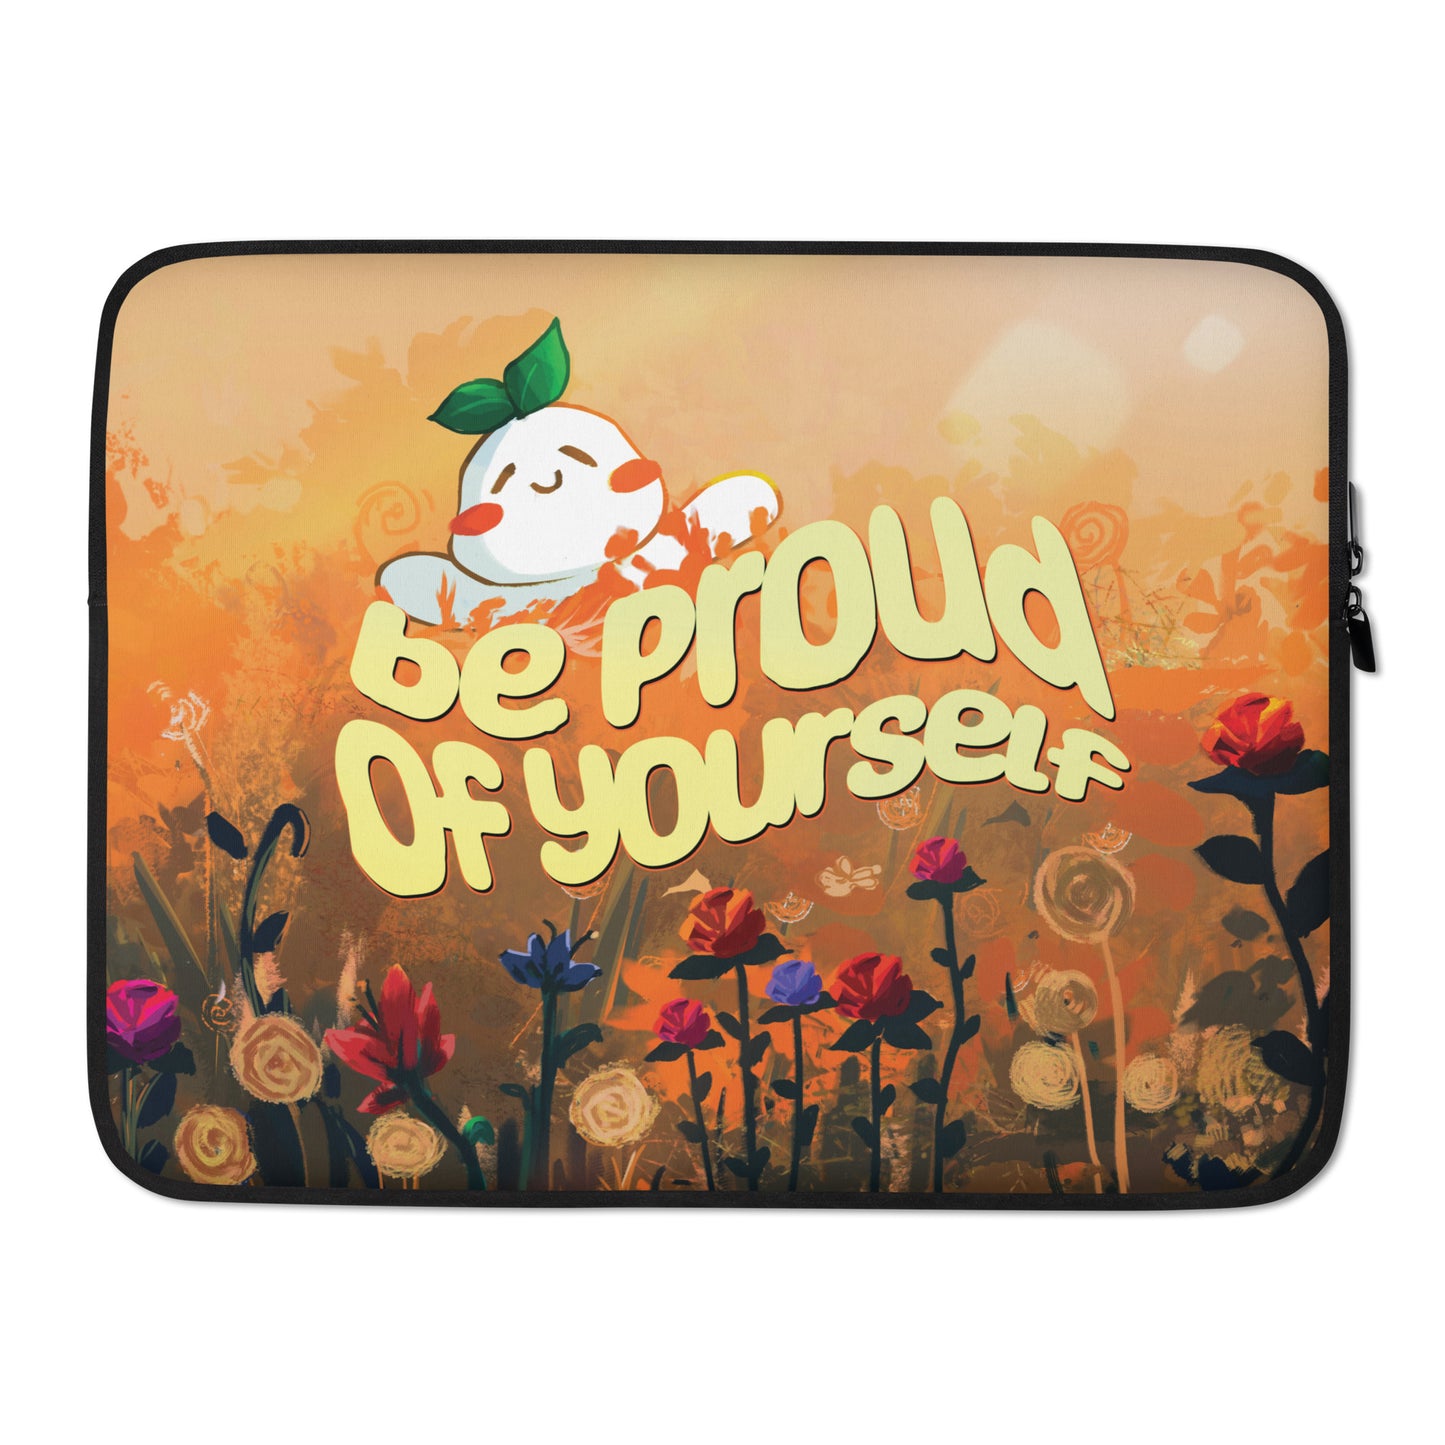 Be proud of yourself | Laptop Sleeve